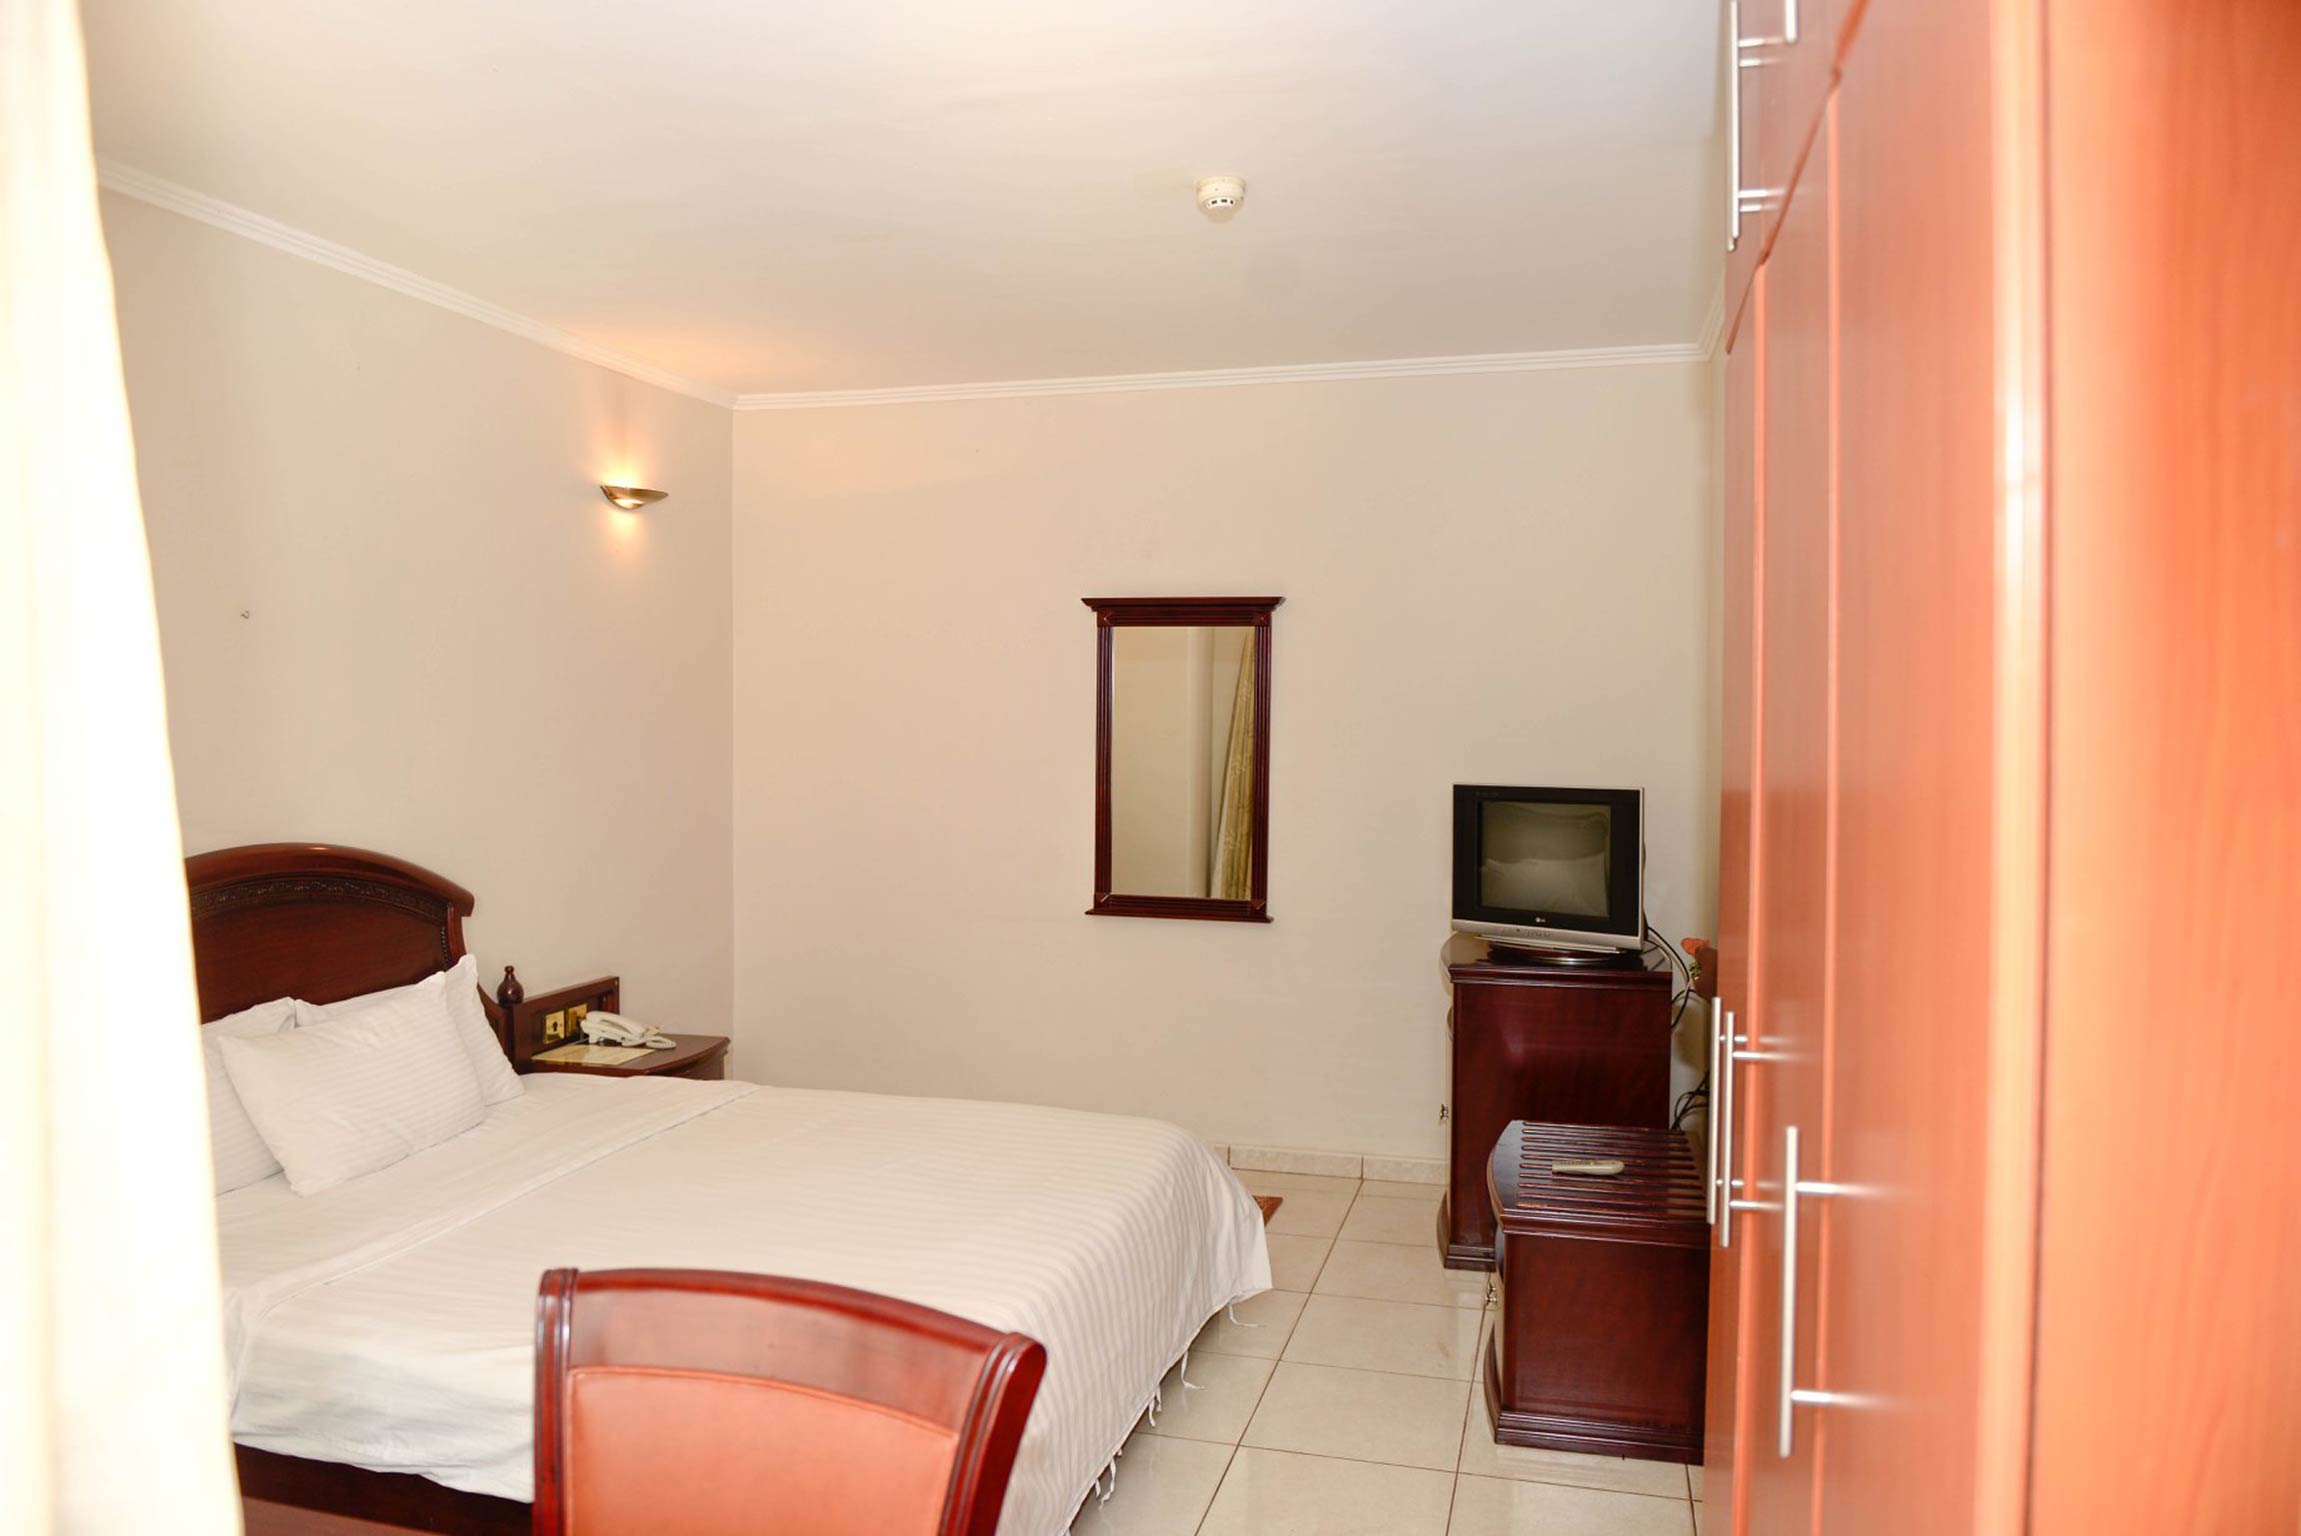 Have A Wonderful Stay In Your Junior Suite Wail In Kigali. - Kigali